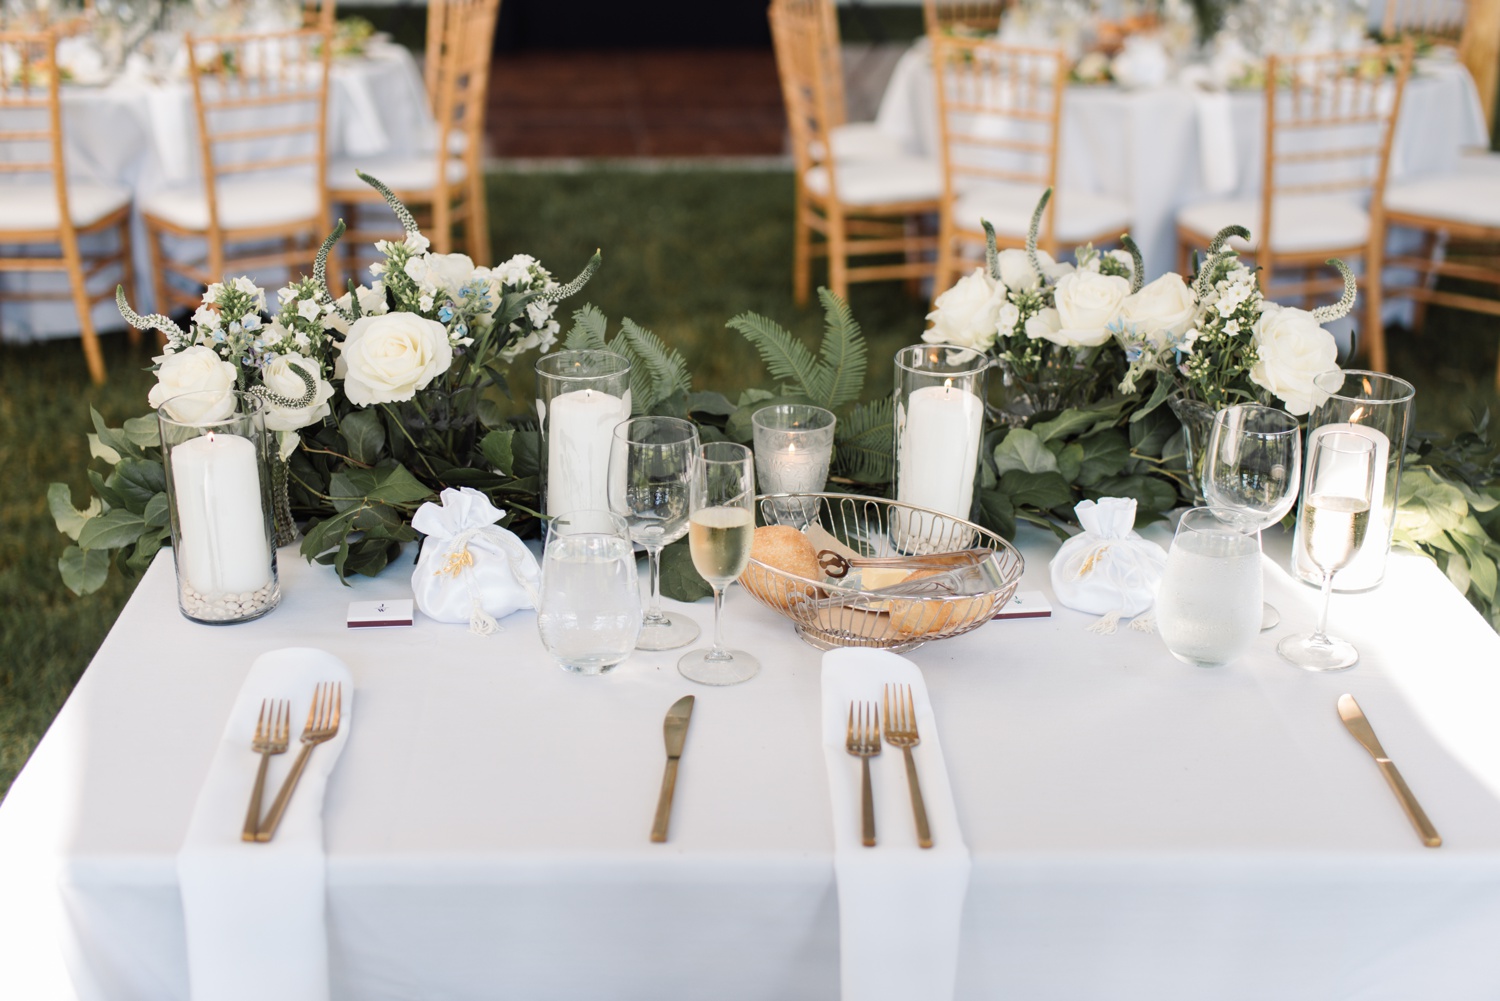 White table linens, gold cutlery, blue and white florals, and white taper candles for a summer tented wedding reception